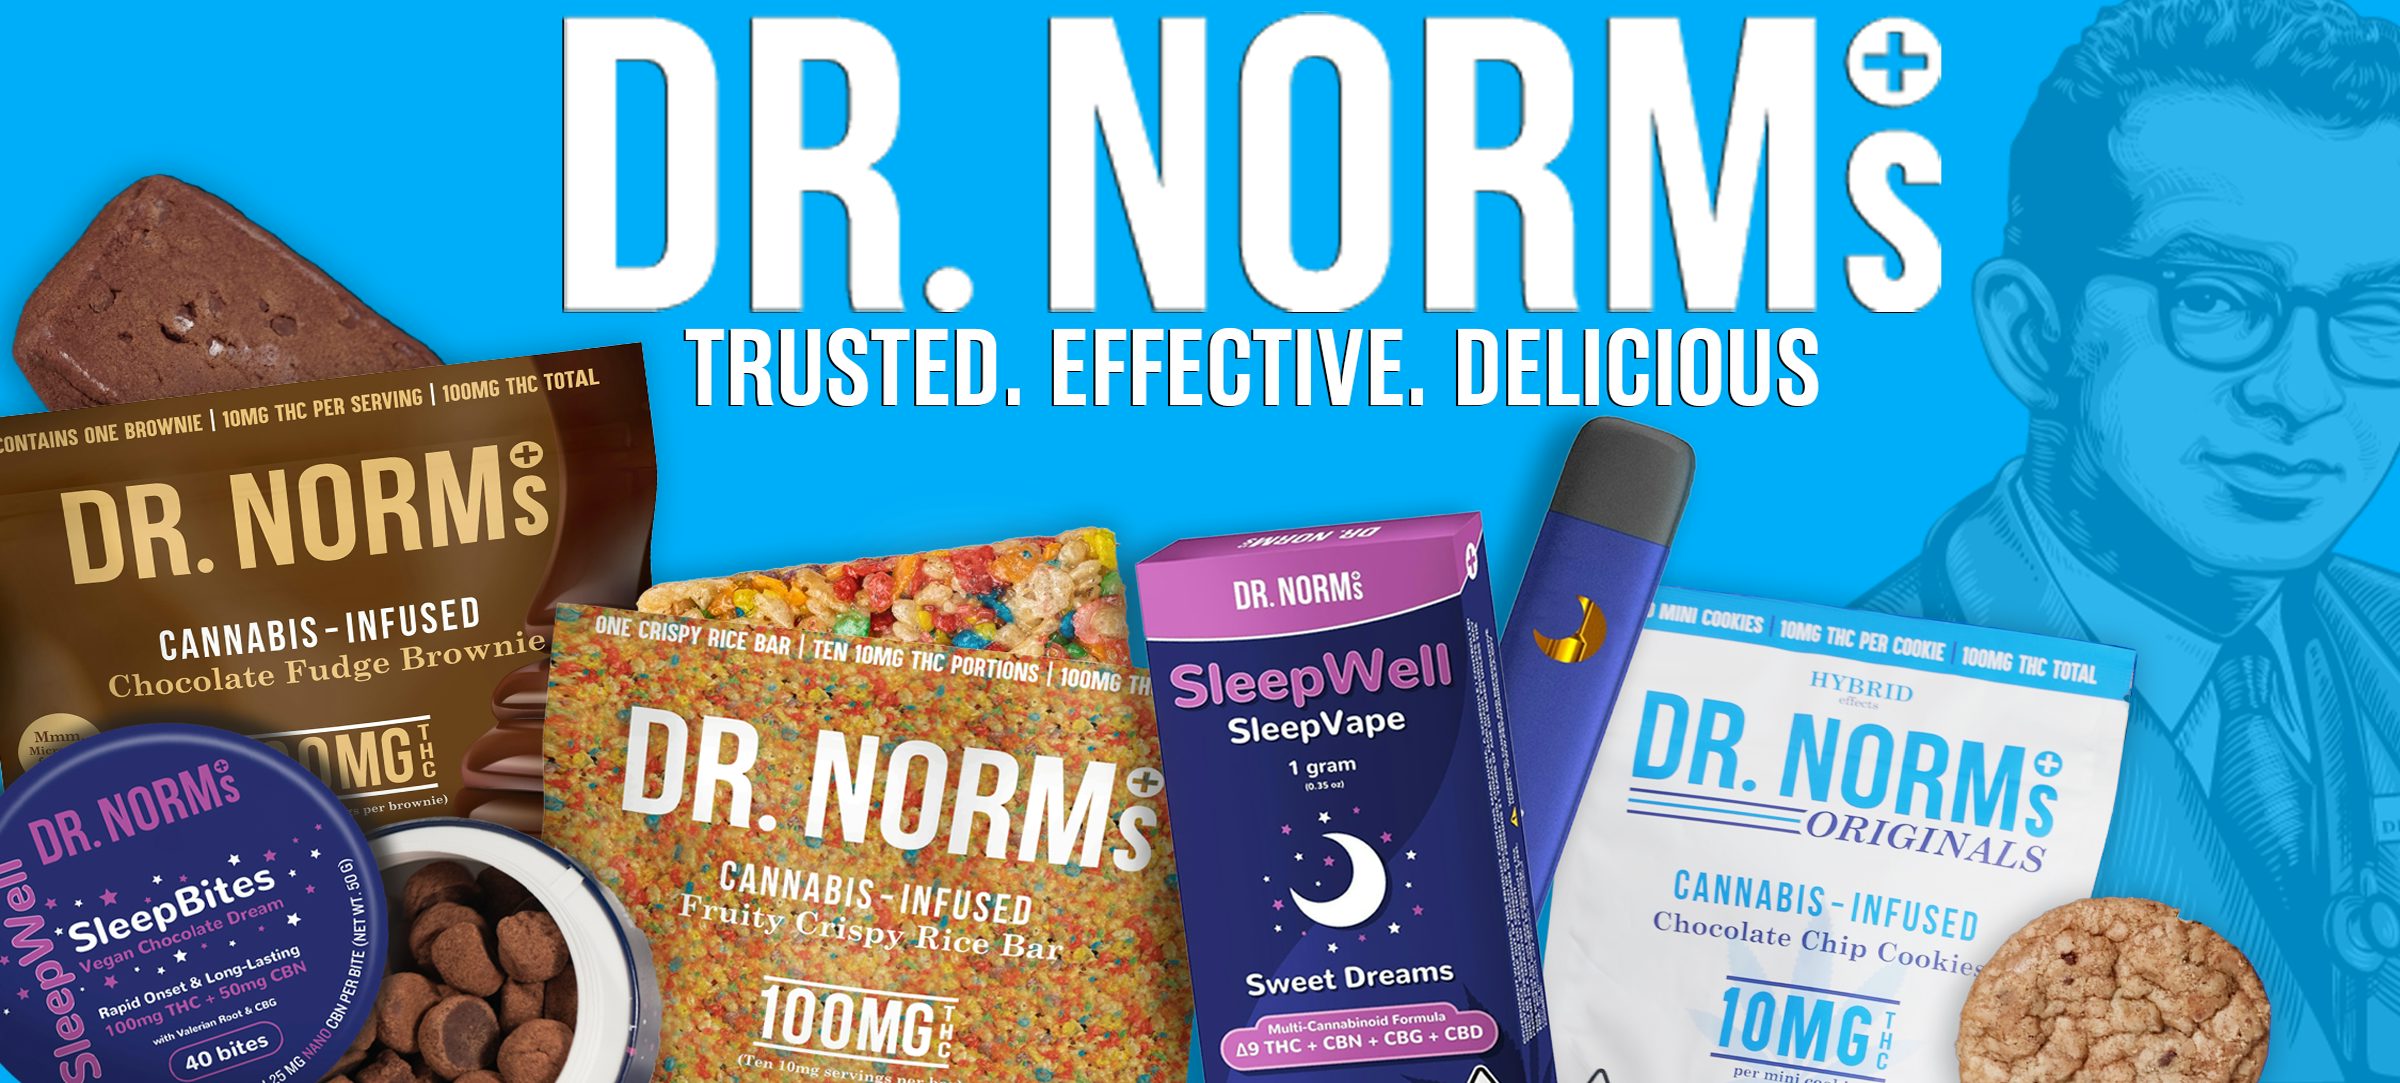 Dr. Norm's banner